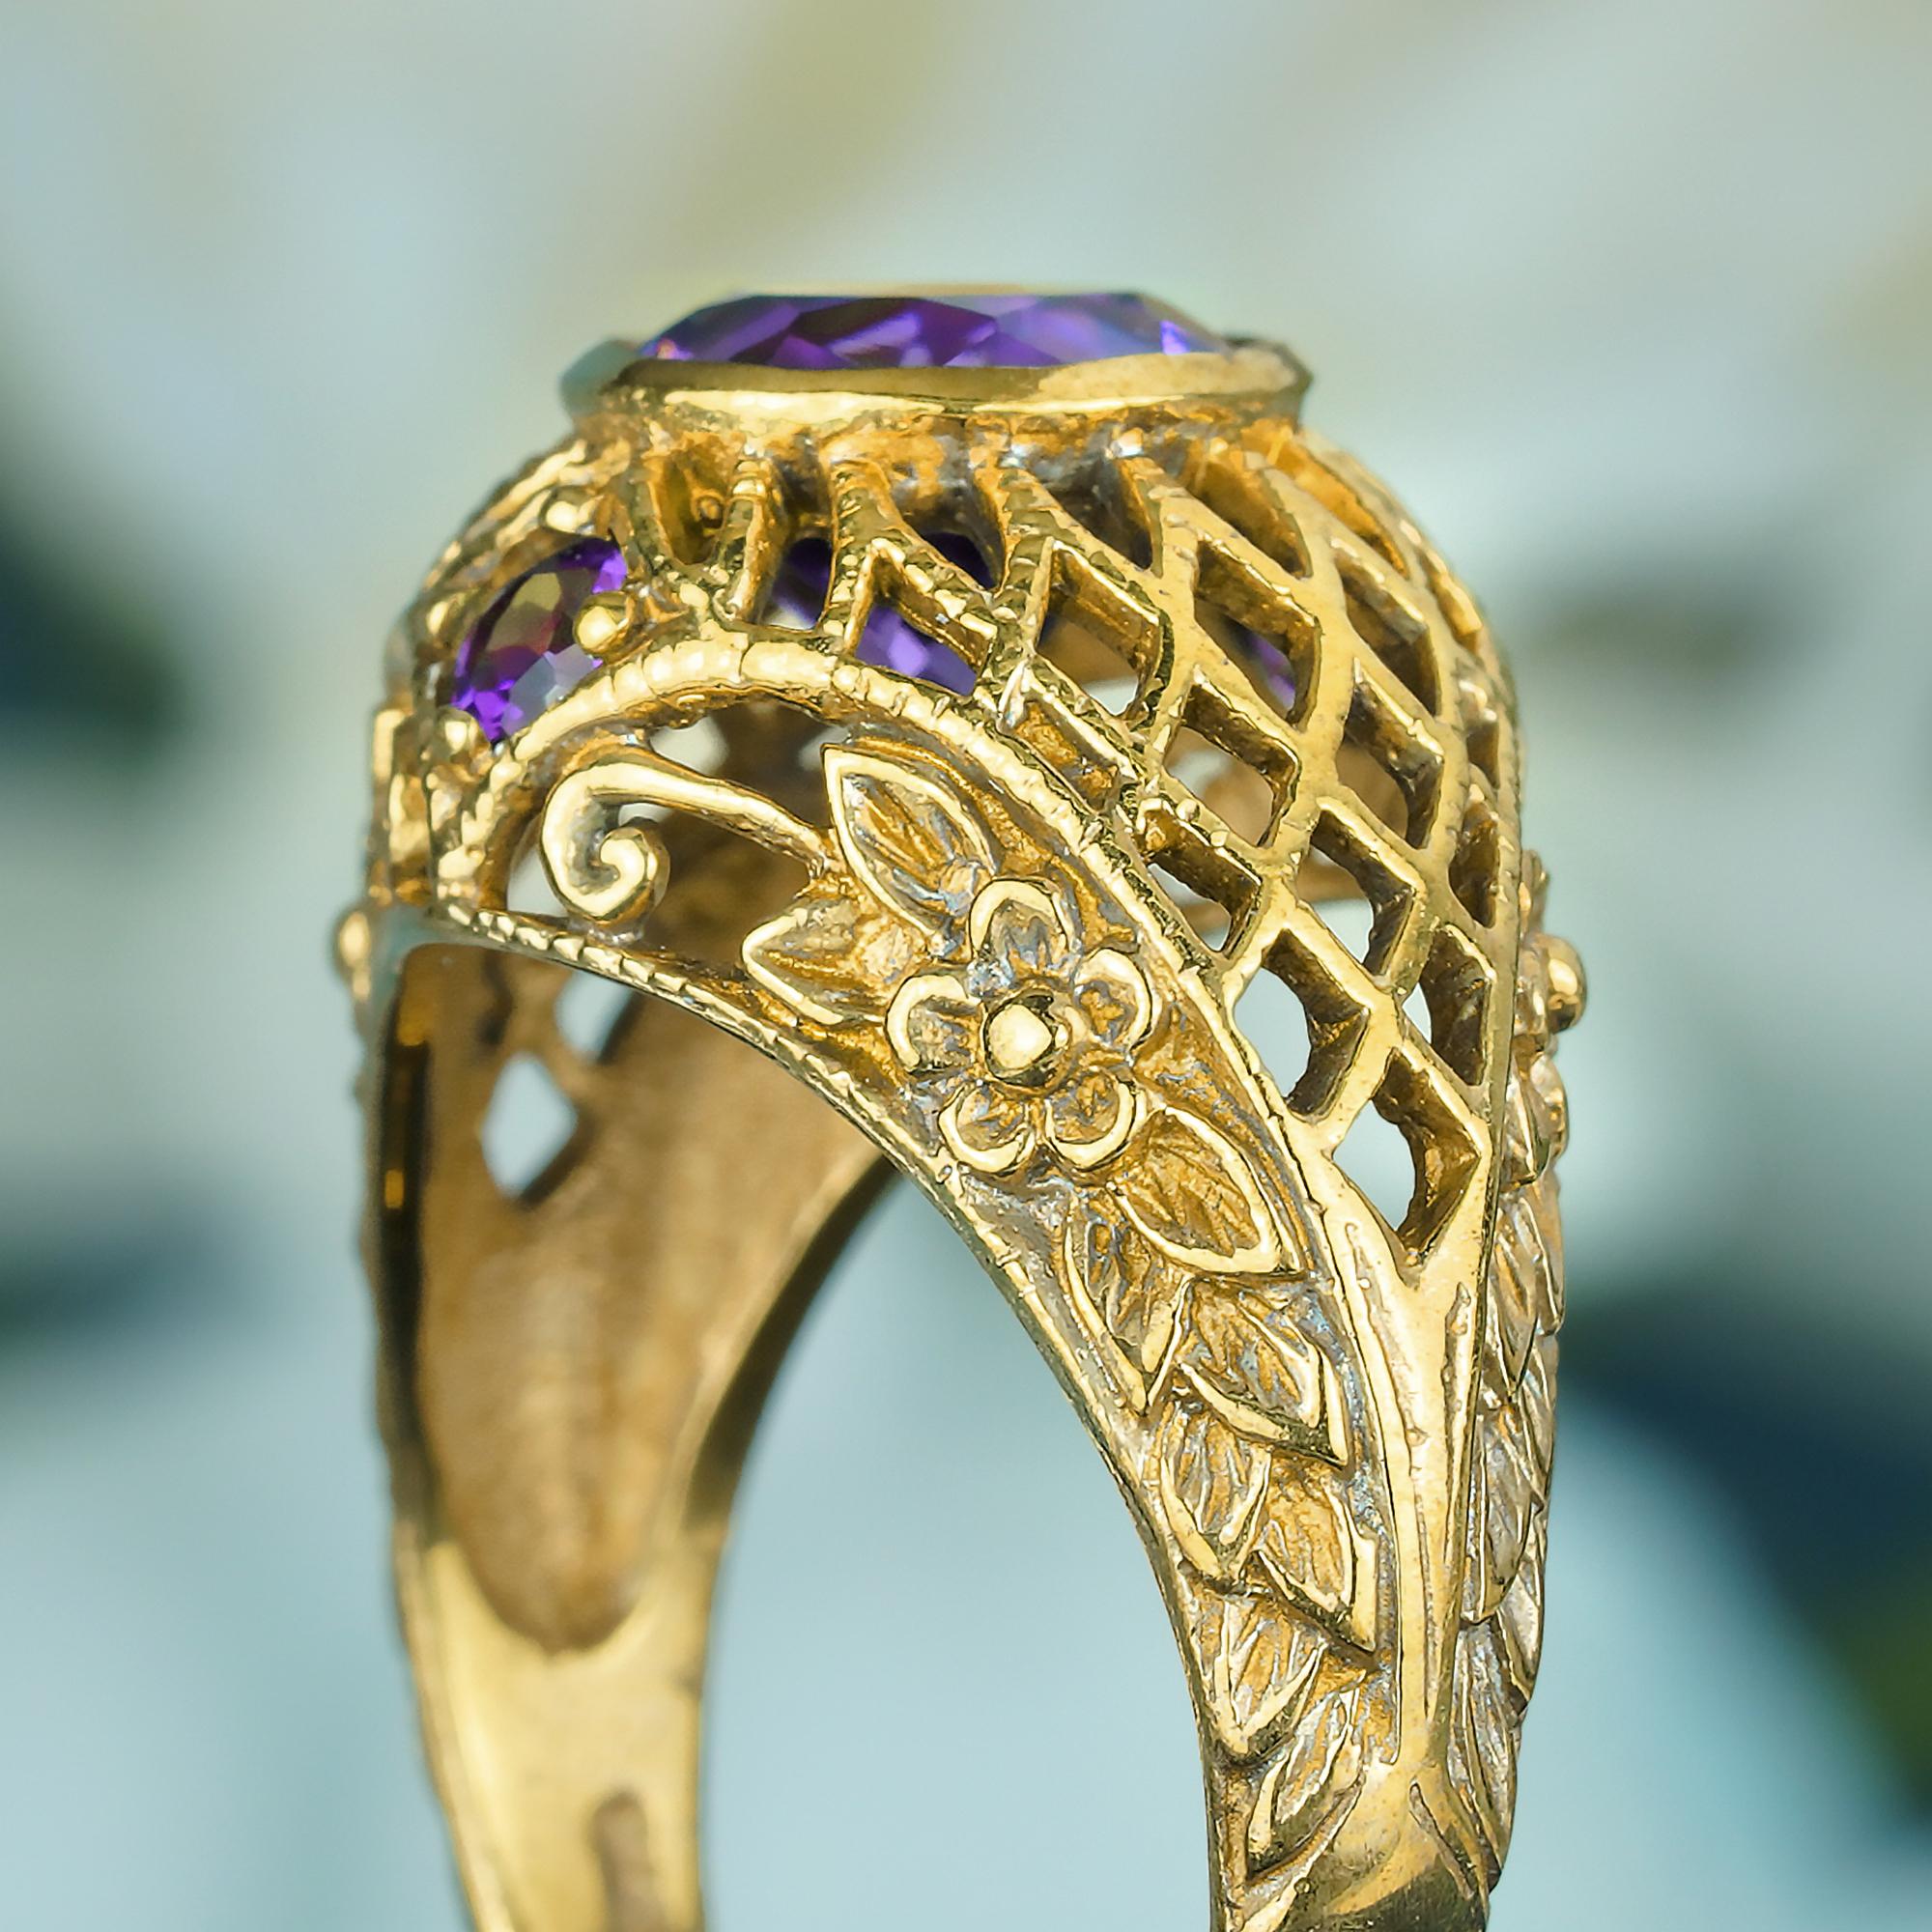 For Sale:  Natural Amethyst Vintage Style Filigree Net Ring in Solid 9K Yellow Gold 6